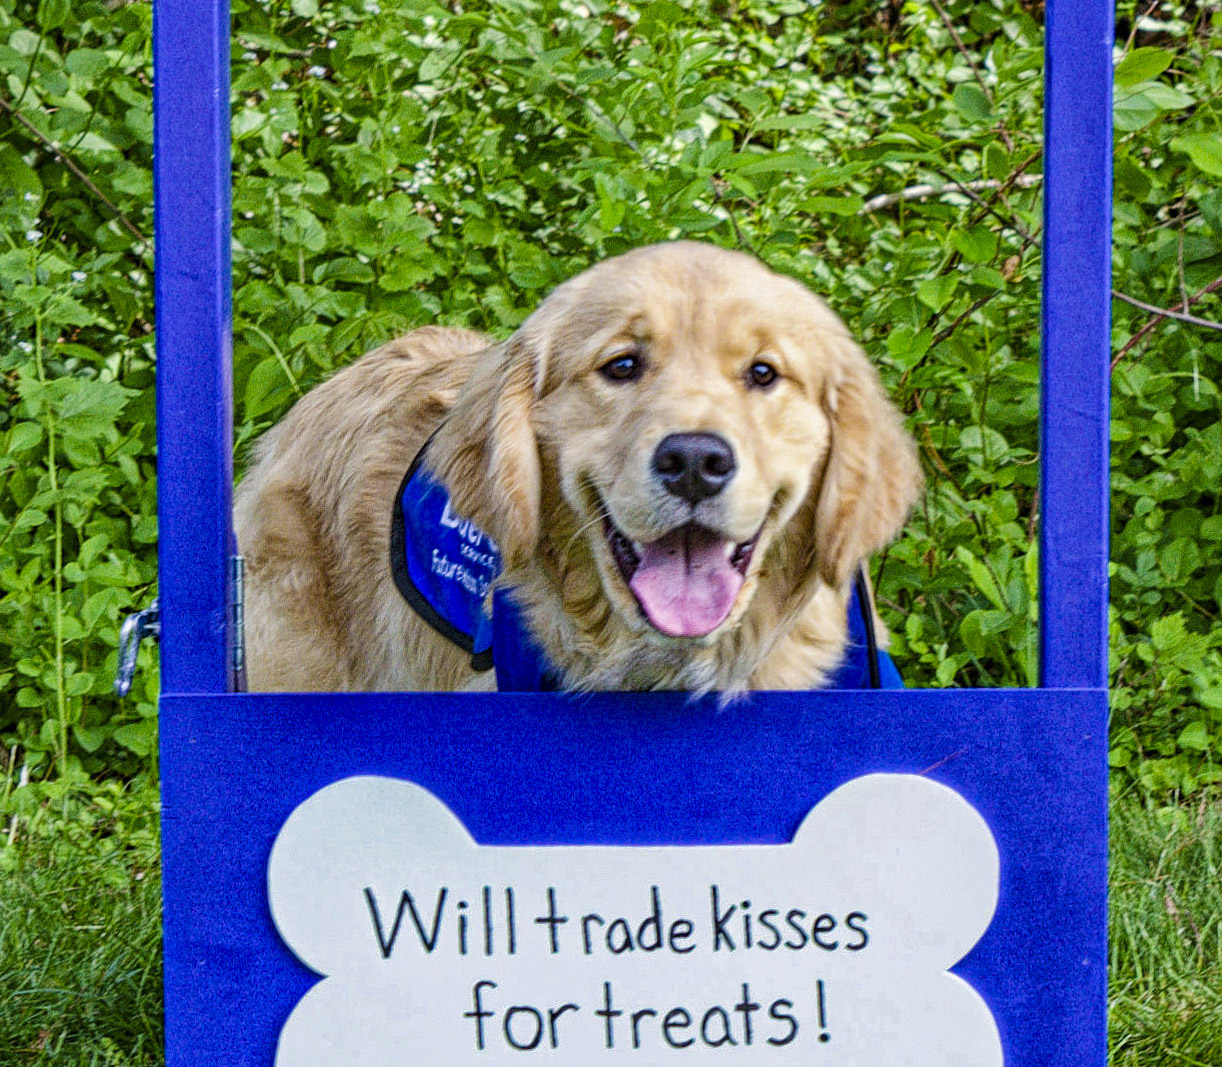 On May 13, 2023 BluePath Service Dogs held their Annual Walkathon at FDR Park in Yorktown. ThinkDIFFERENTLY was a sponsor and tabled at the event, which was attended by hundreds of people and maybe even more pups!! In this picture, a Golden Retreiver is ready to give kisses in order to get treats with a sign that reads “Will trade kisses for treats”. This pup also sports a BluePath Service Dog harness.